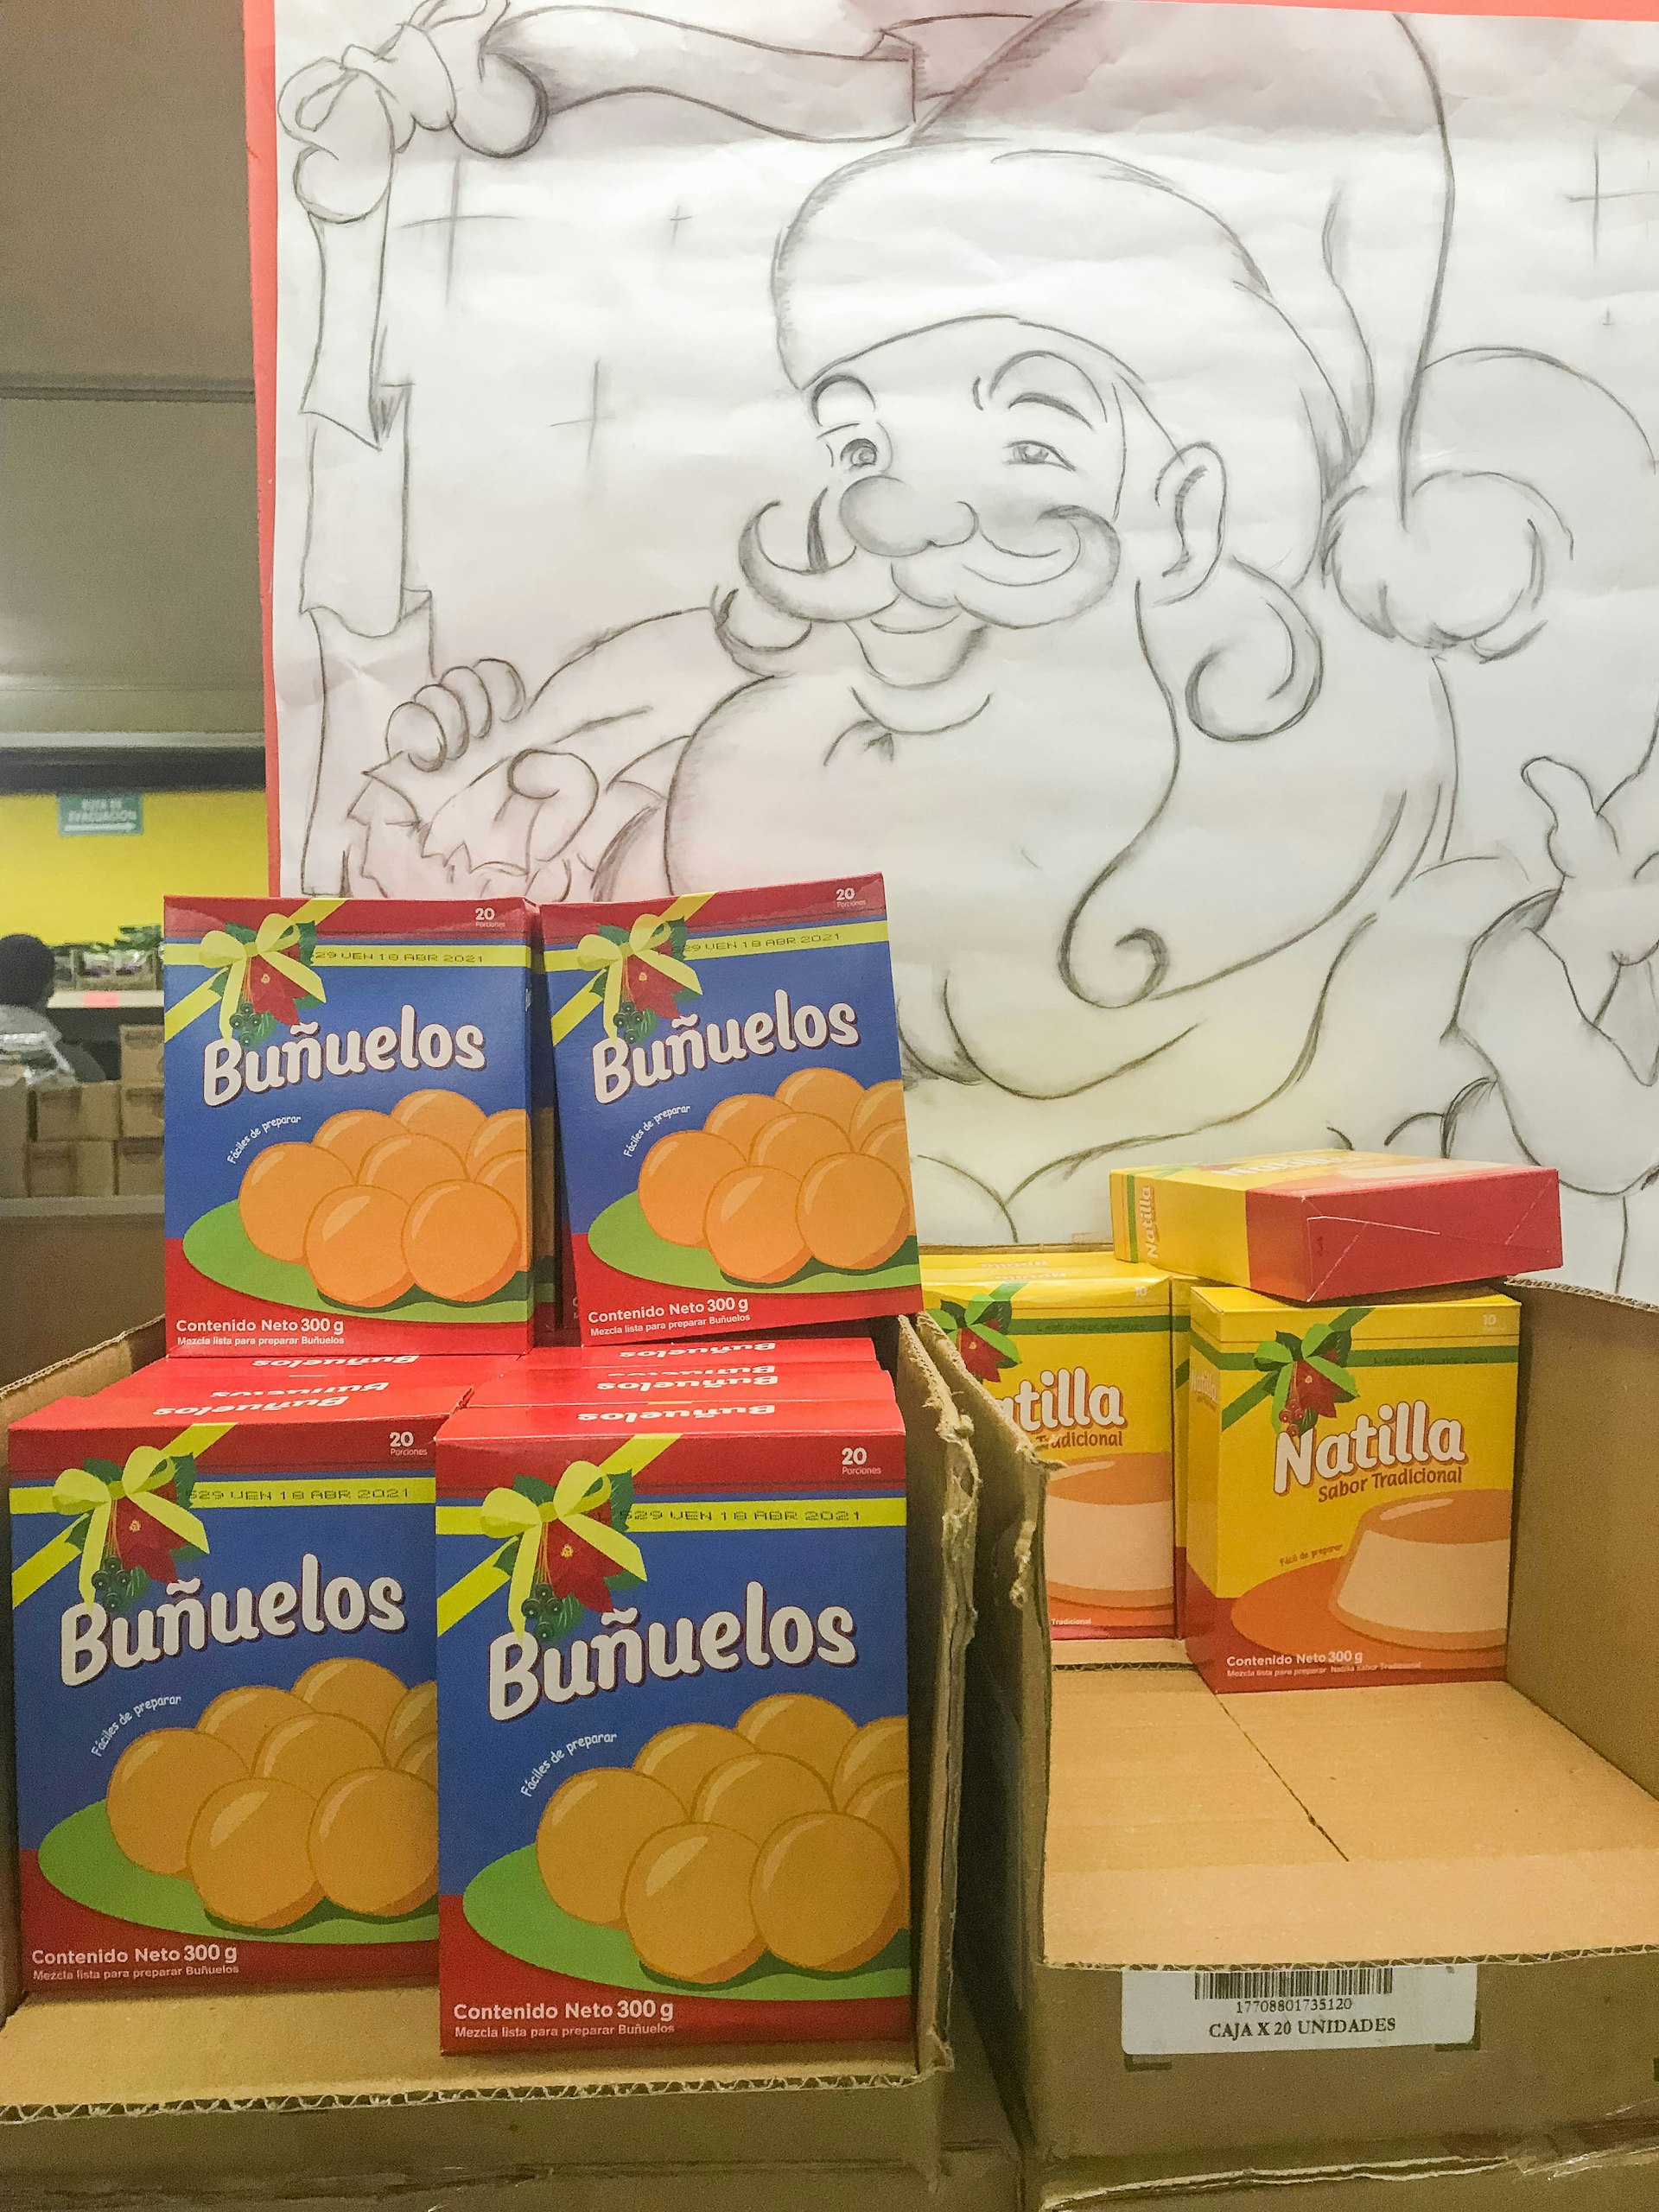 A hand-drawn sketch of Santa in pencil presides over blue and red boxes of Buñuelos and yellow boxes Natillas, both with Christmas ribbons and holly on their packaging. 